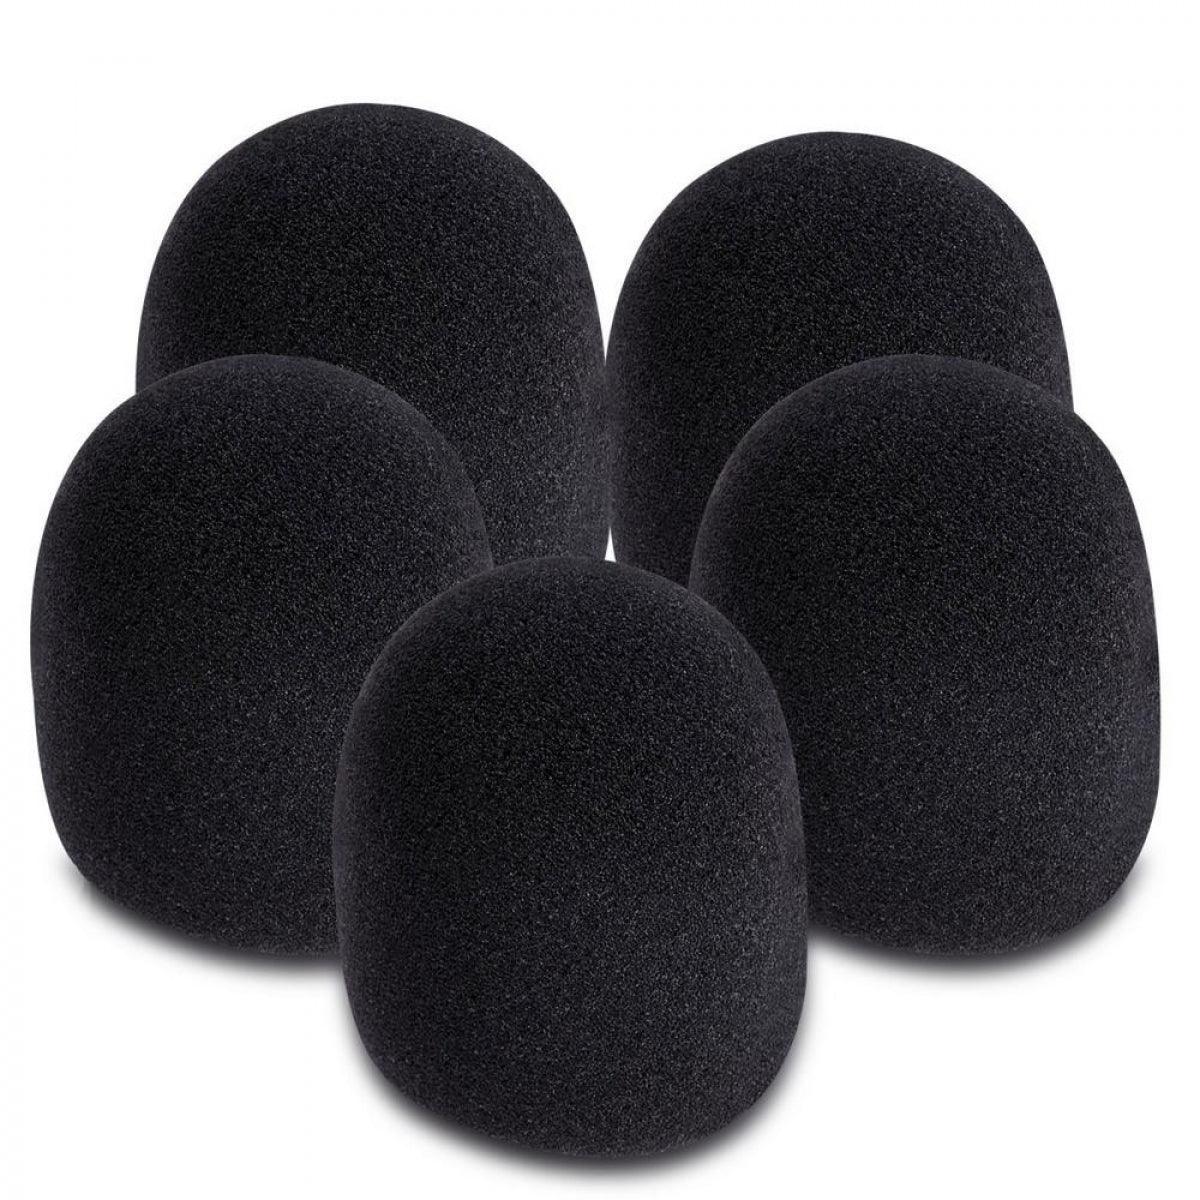 On-Stage ASWS58B5 Microphone Windscreen 5-Pack (Black) - Impulse Music Co.